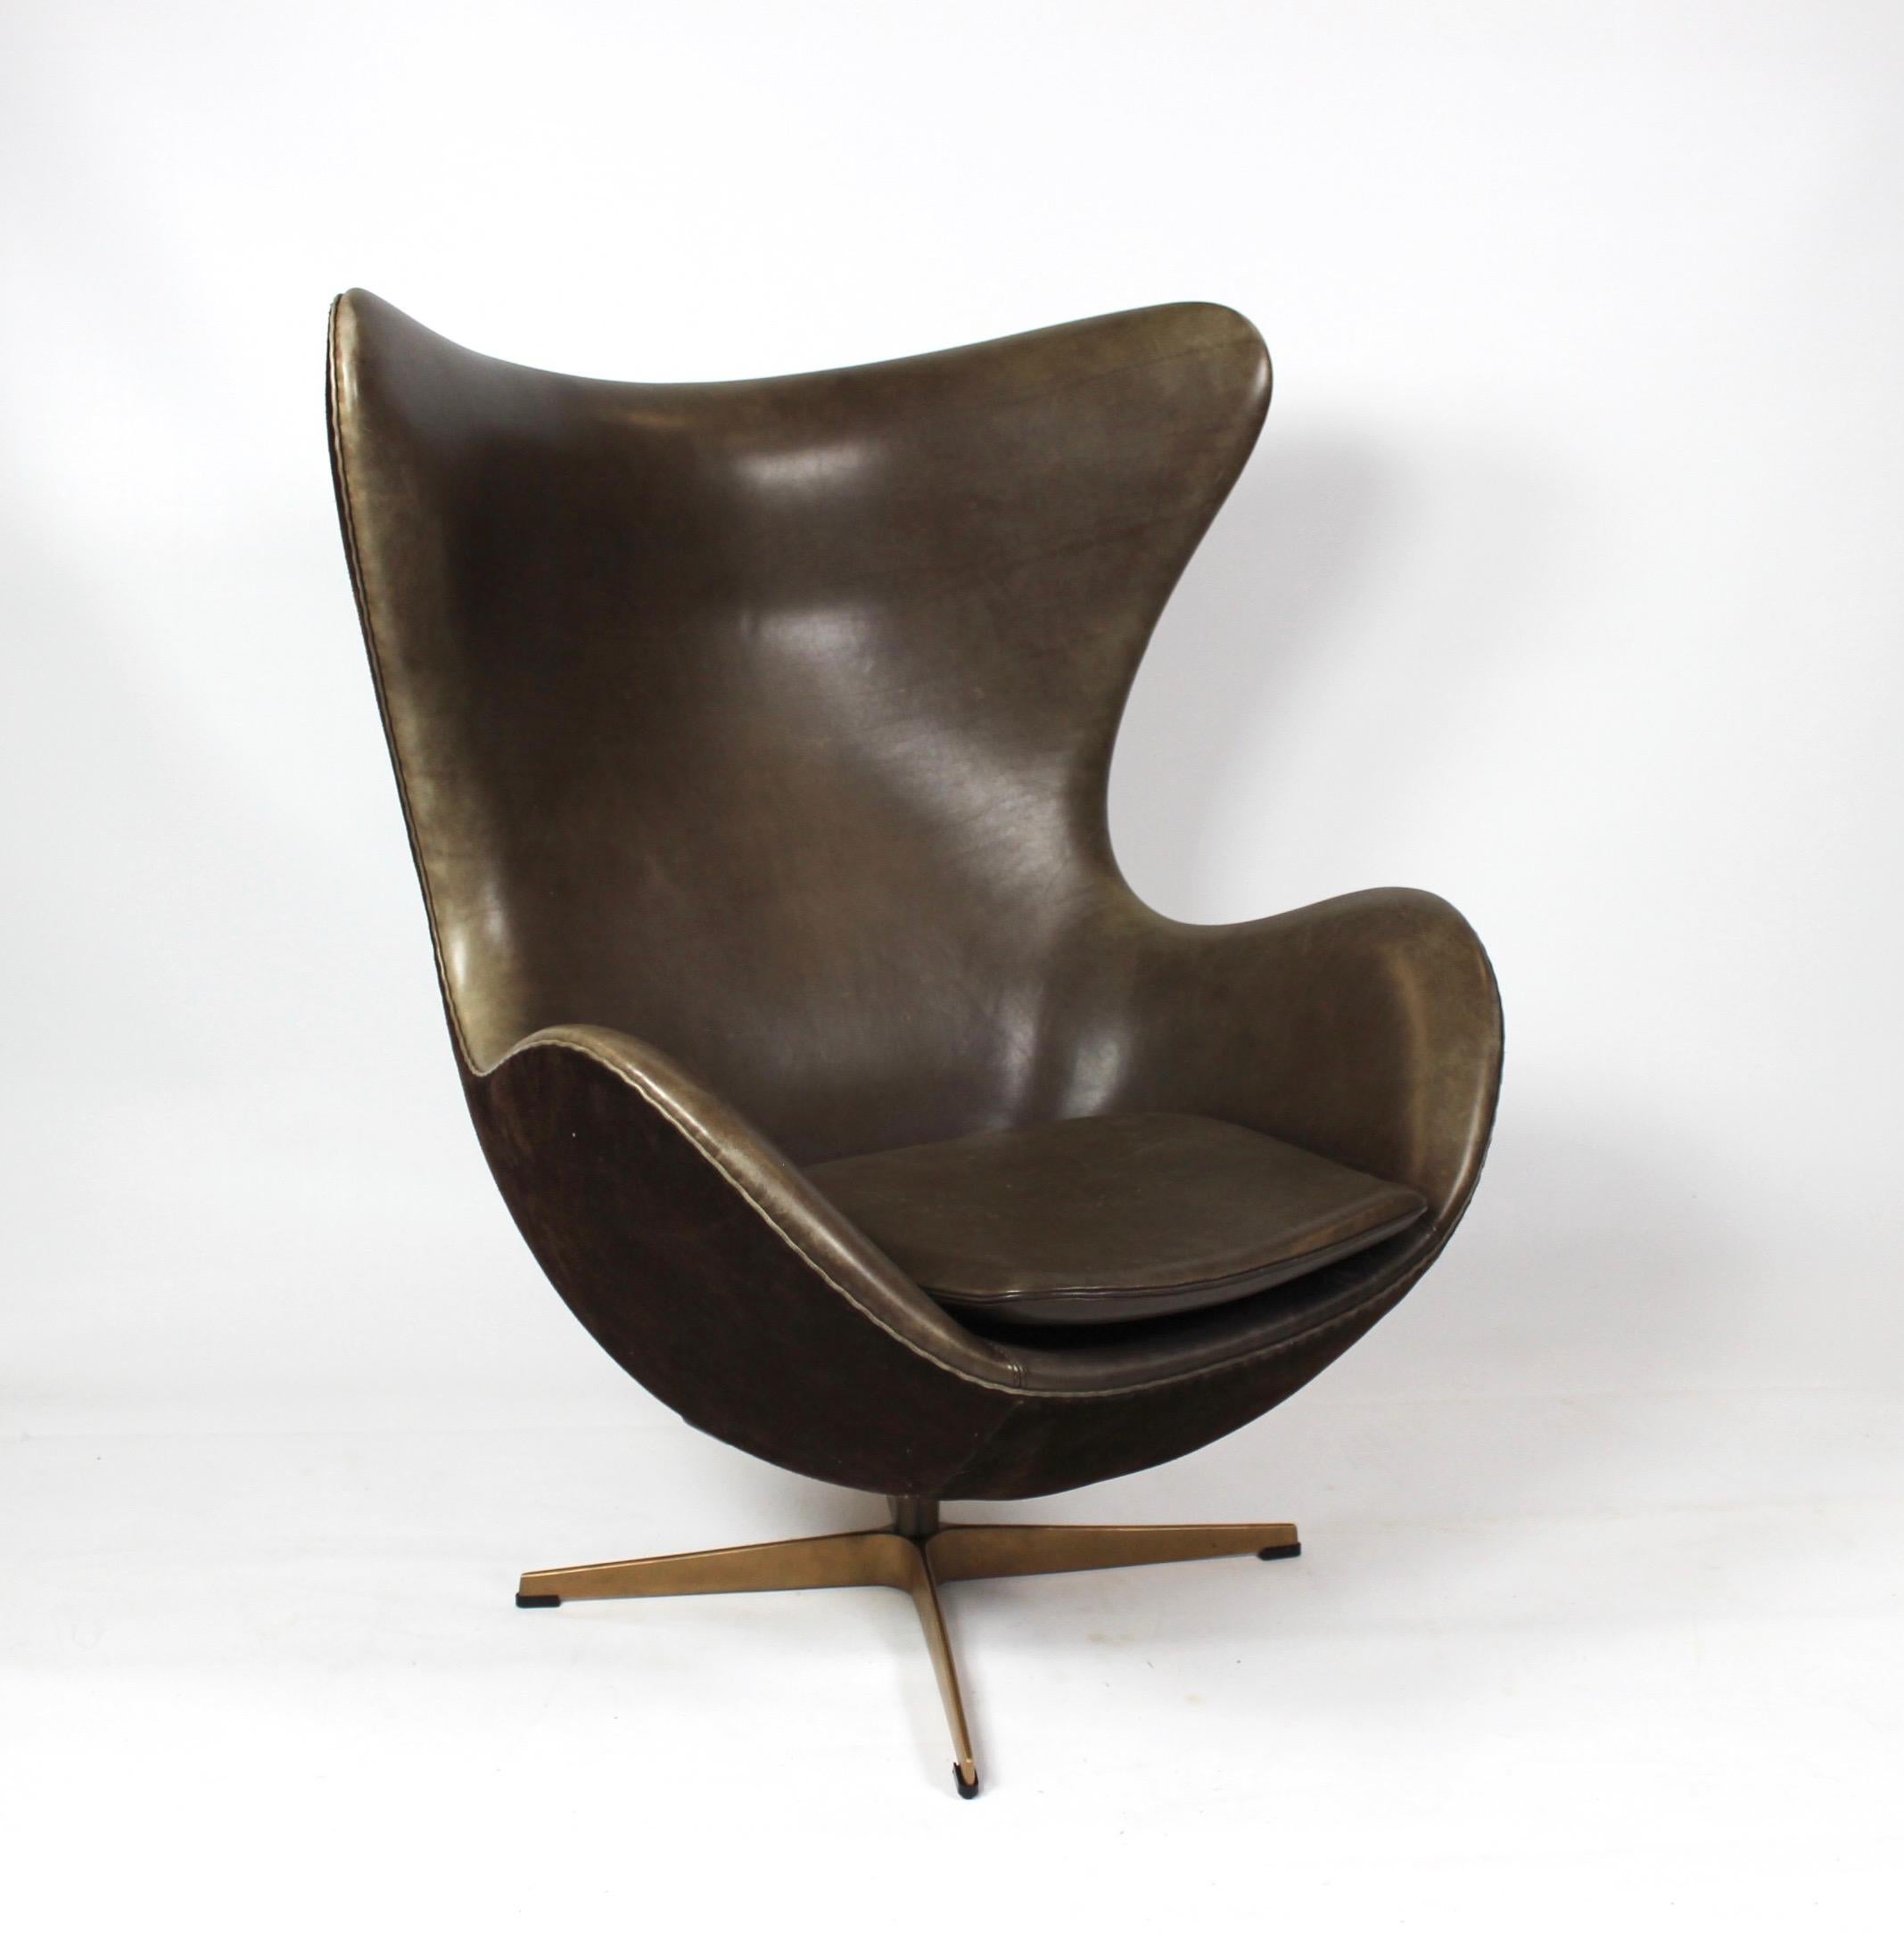 Set of the egg, model 3316, and matching stool designed by Arne Jacobsen 1958 and manufactured by Fritz Hansen in 2008 due to the 50 year anniversary for the production of the egg. The egg and stool are upholstered with dark brown leather and suede,